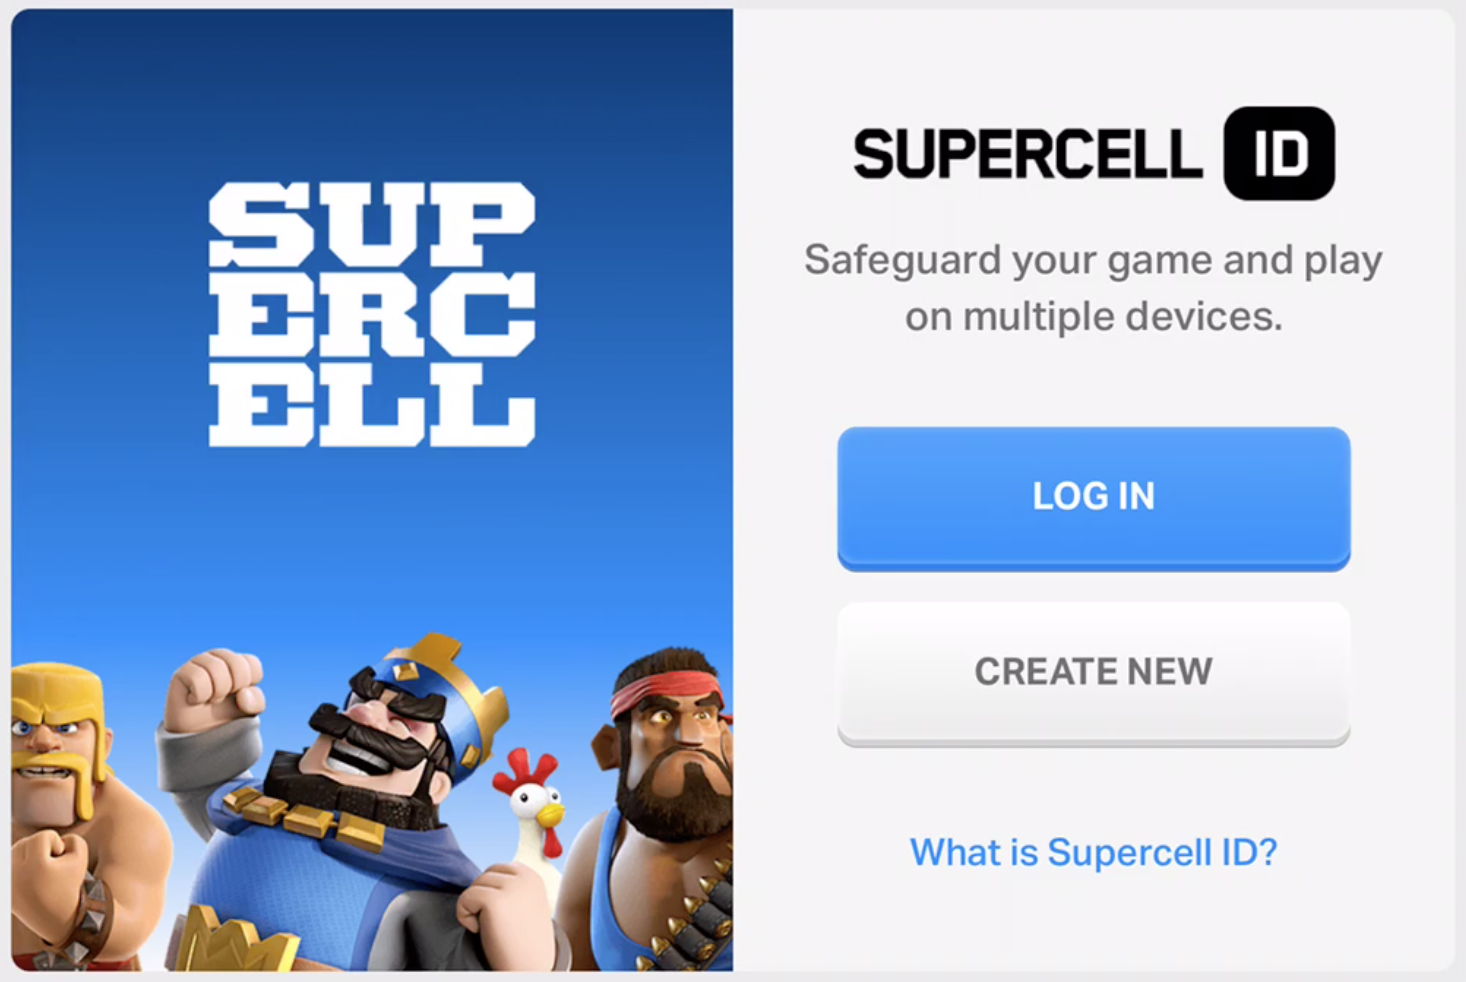 Https id supercell com. Суперселл ID. Картинки Supercell. Игры Supercell ID. Значок Supercell ID.